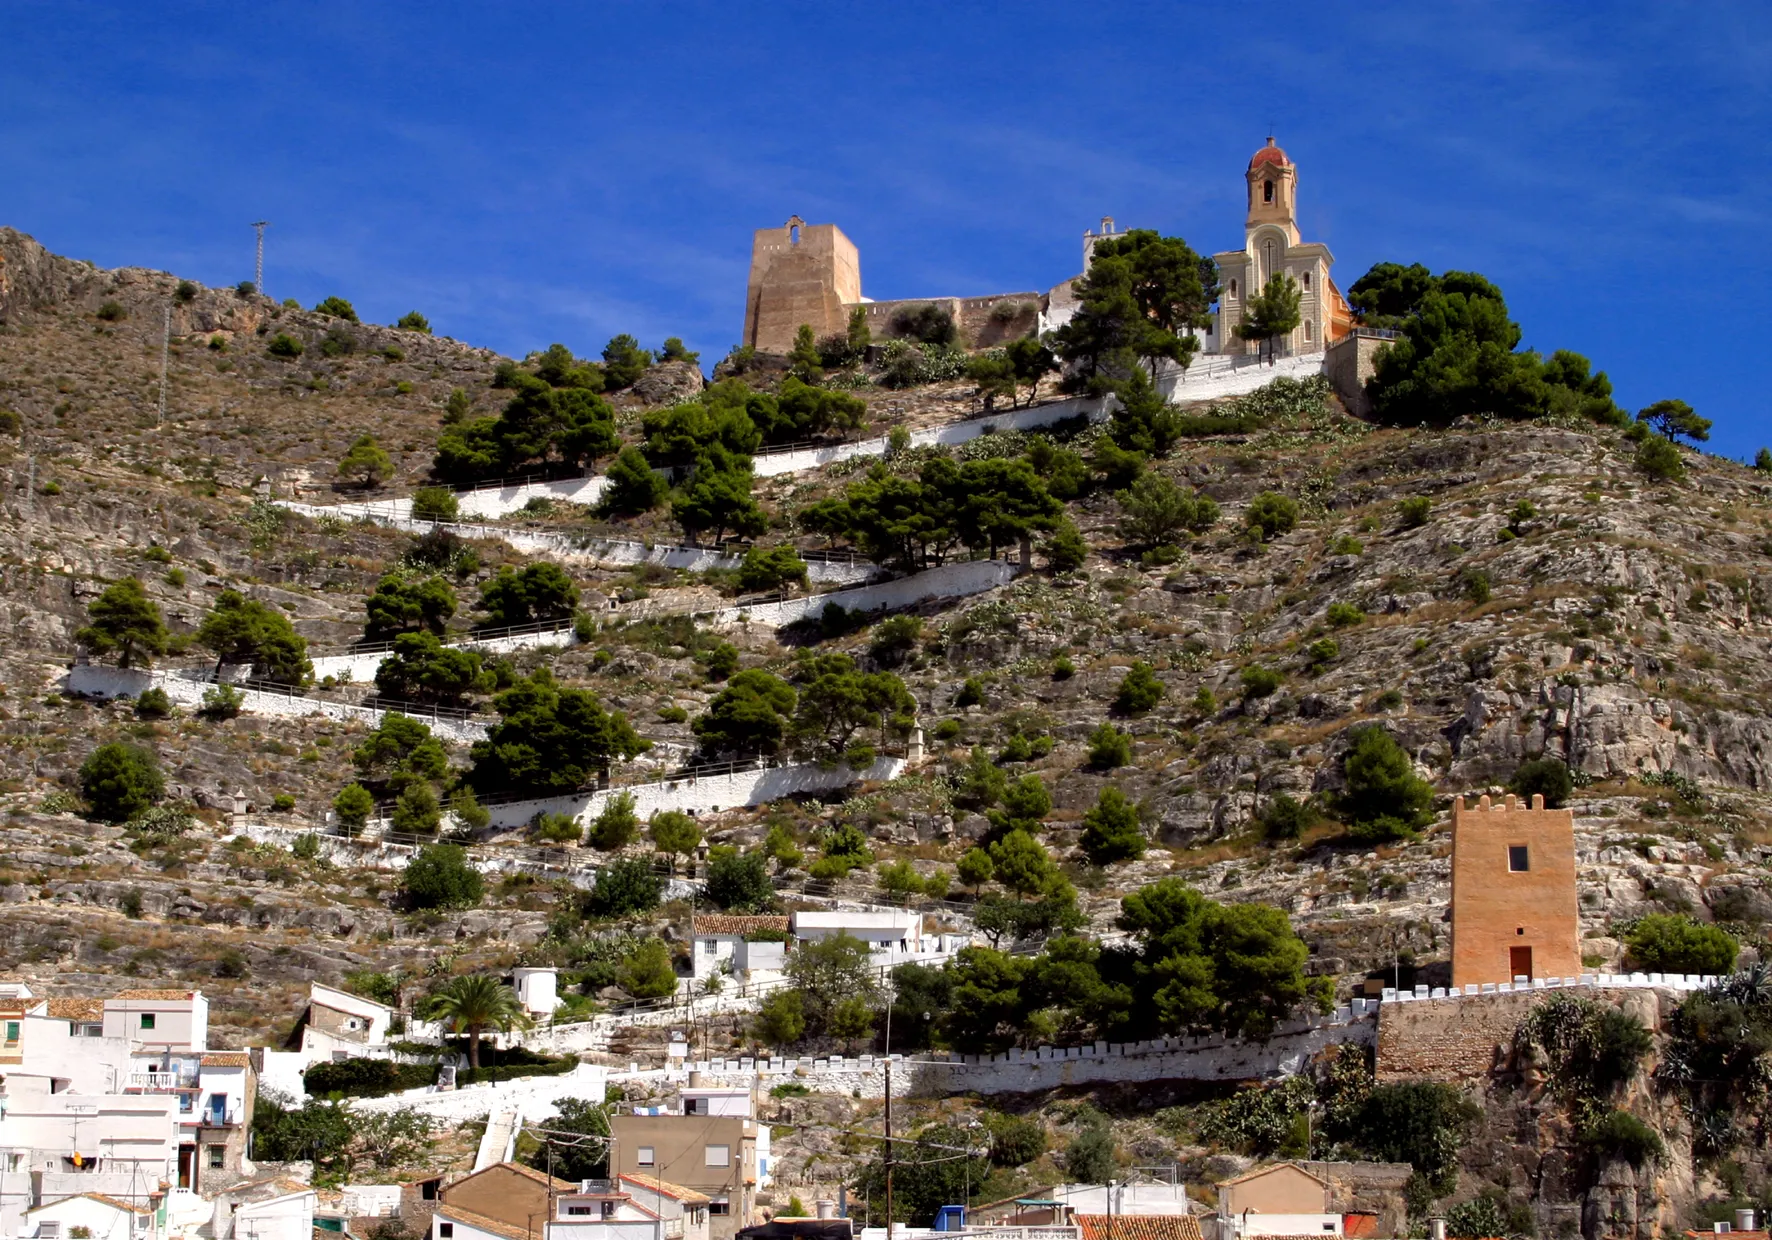 Photo showing: The Castle of Cullera and Camino del Calvario (the way of the cross)